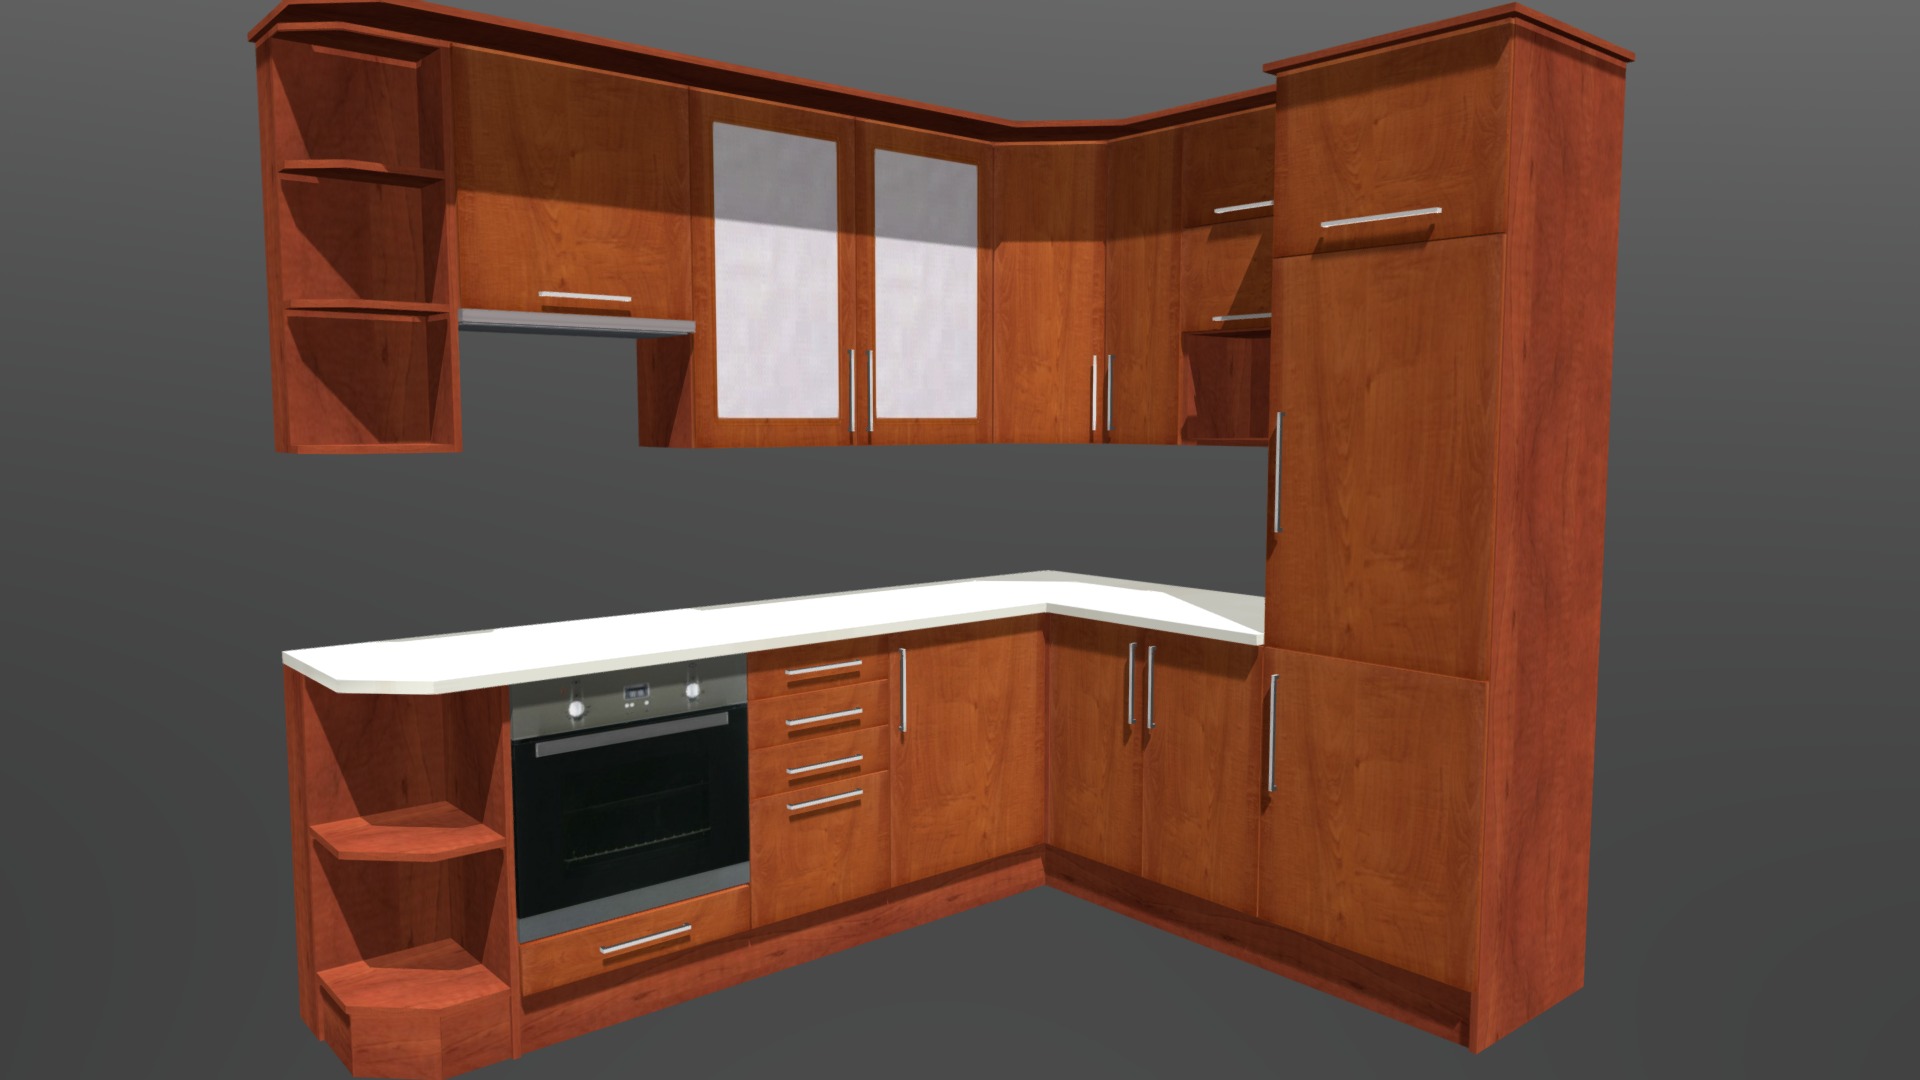 3D model Kitchen Cabinet 4 - This is a 3D model of the Kitchen Cabinet 4. The 3D model is about a kitchen with wooden cabinets.